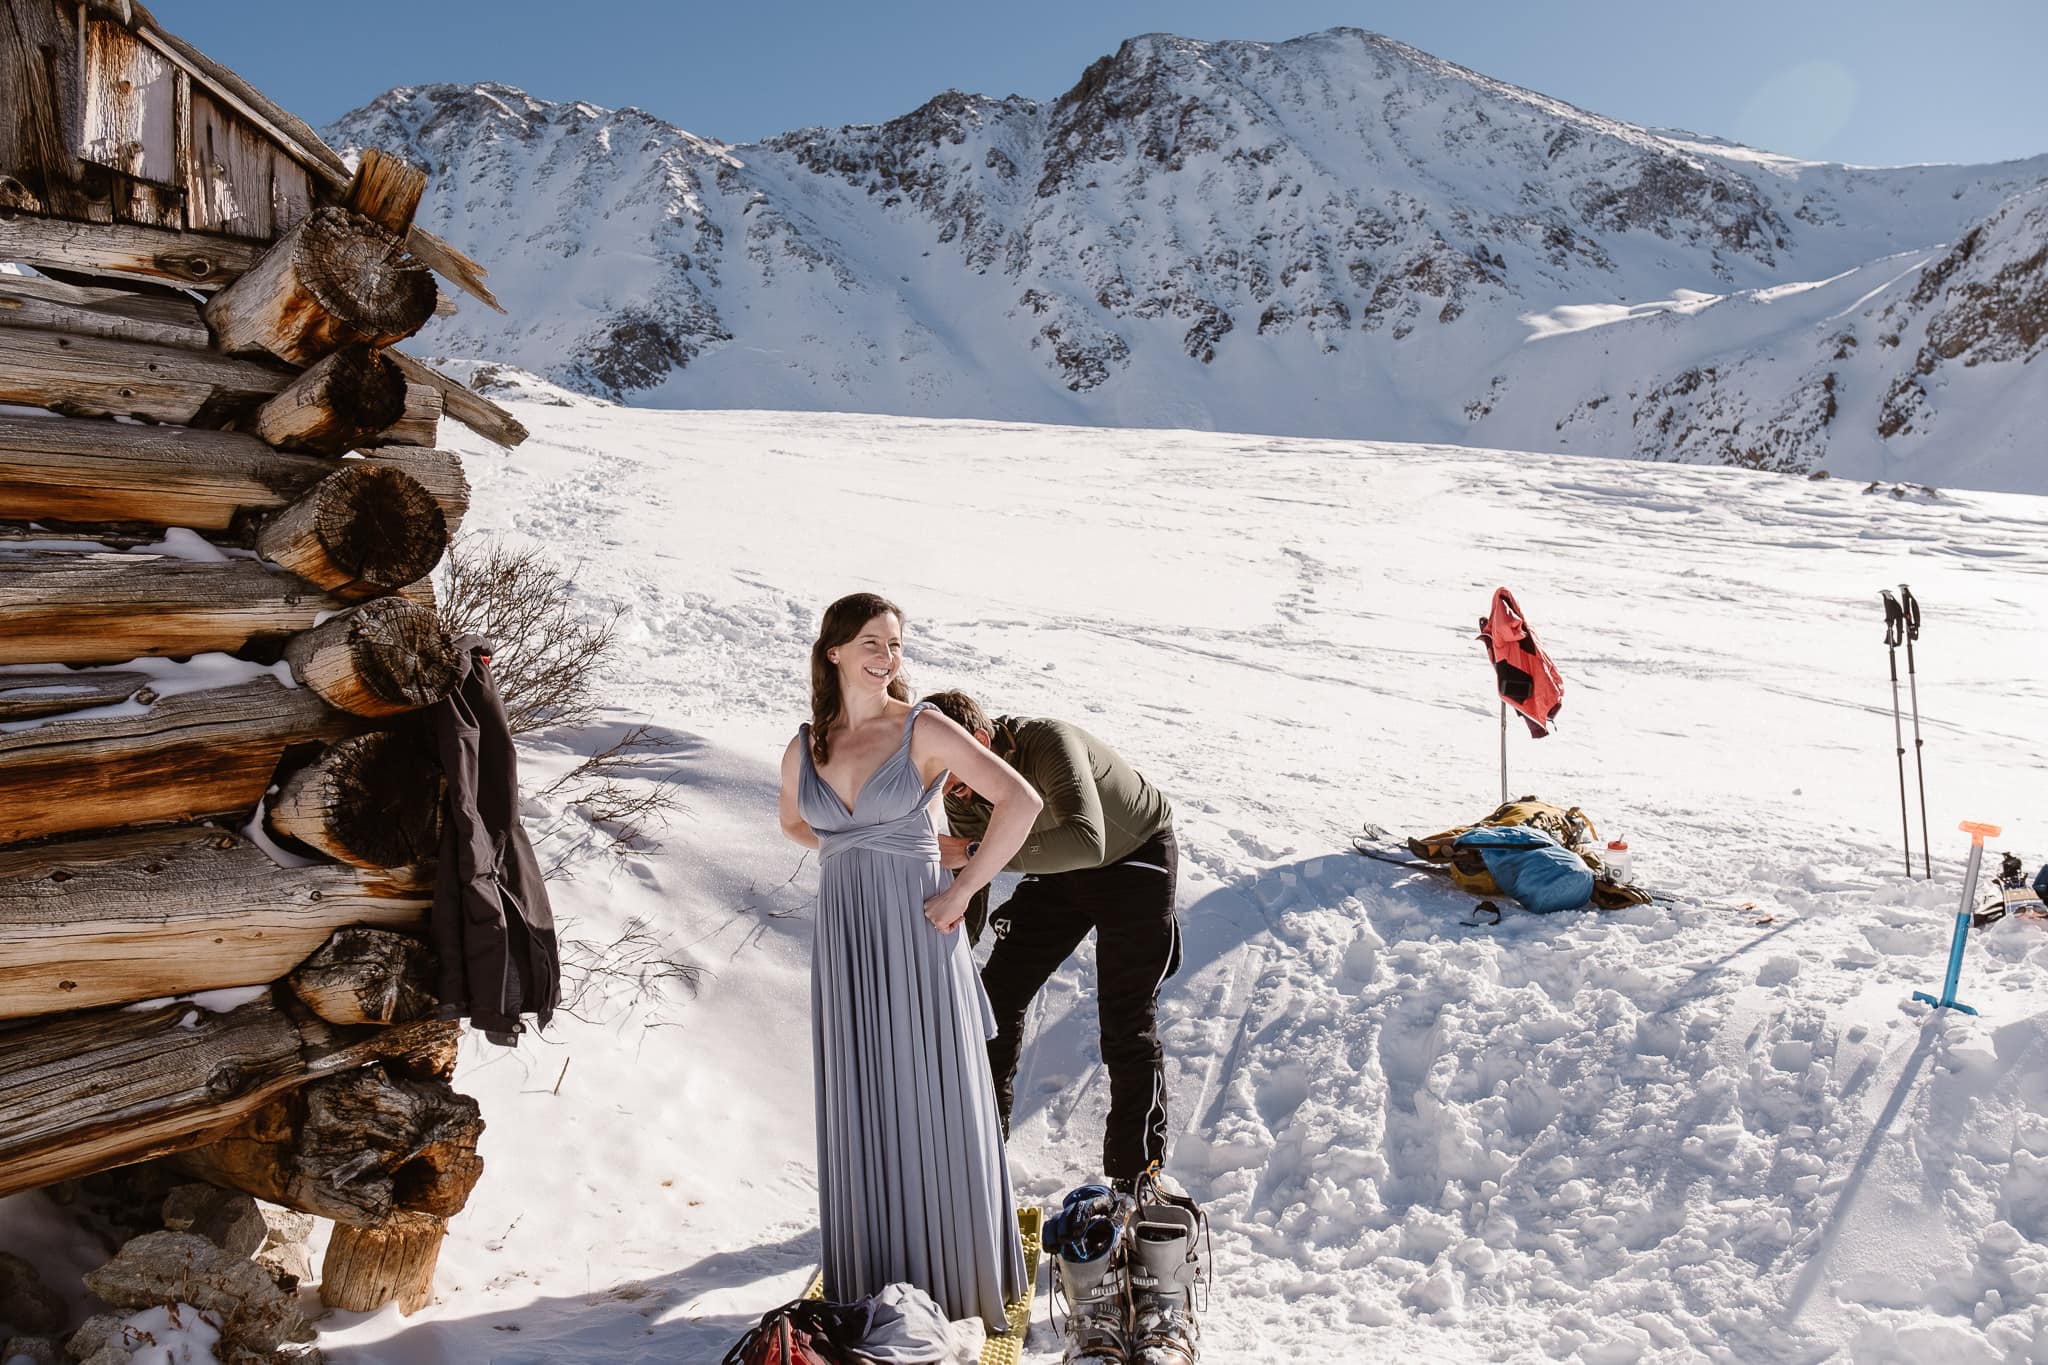 Bride and groom getting dressed by old mining cabin, Colorado winter elopement in the mountains, backcountry skiing elopement